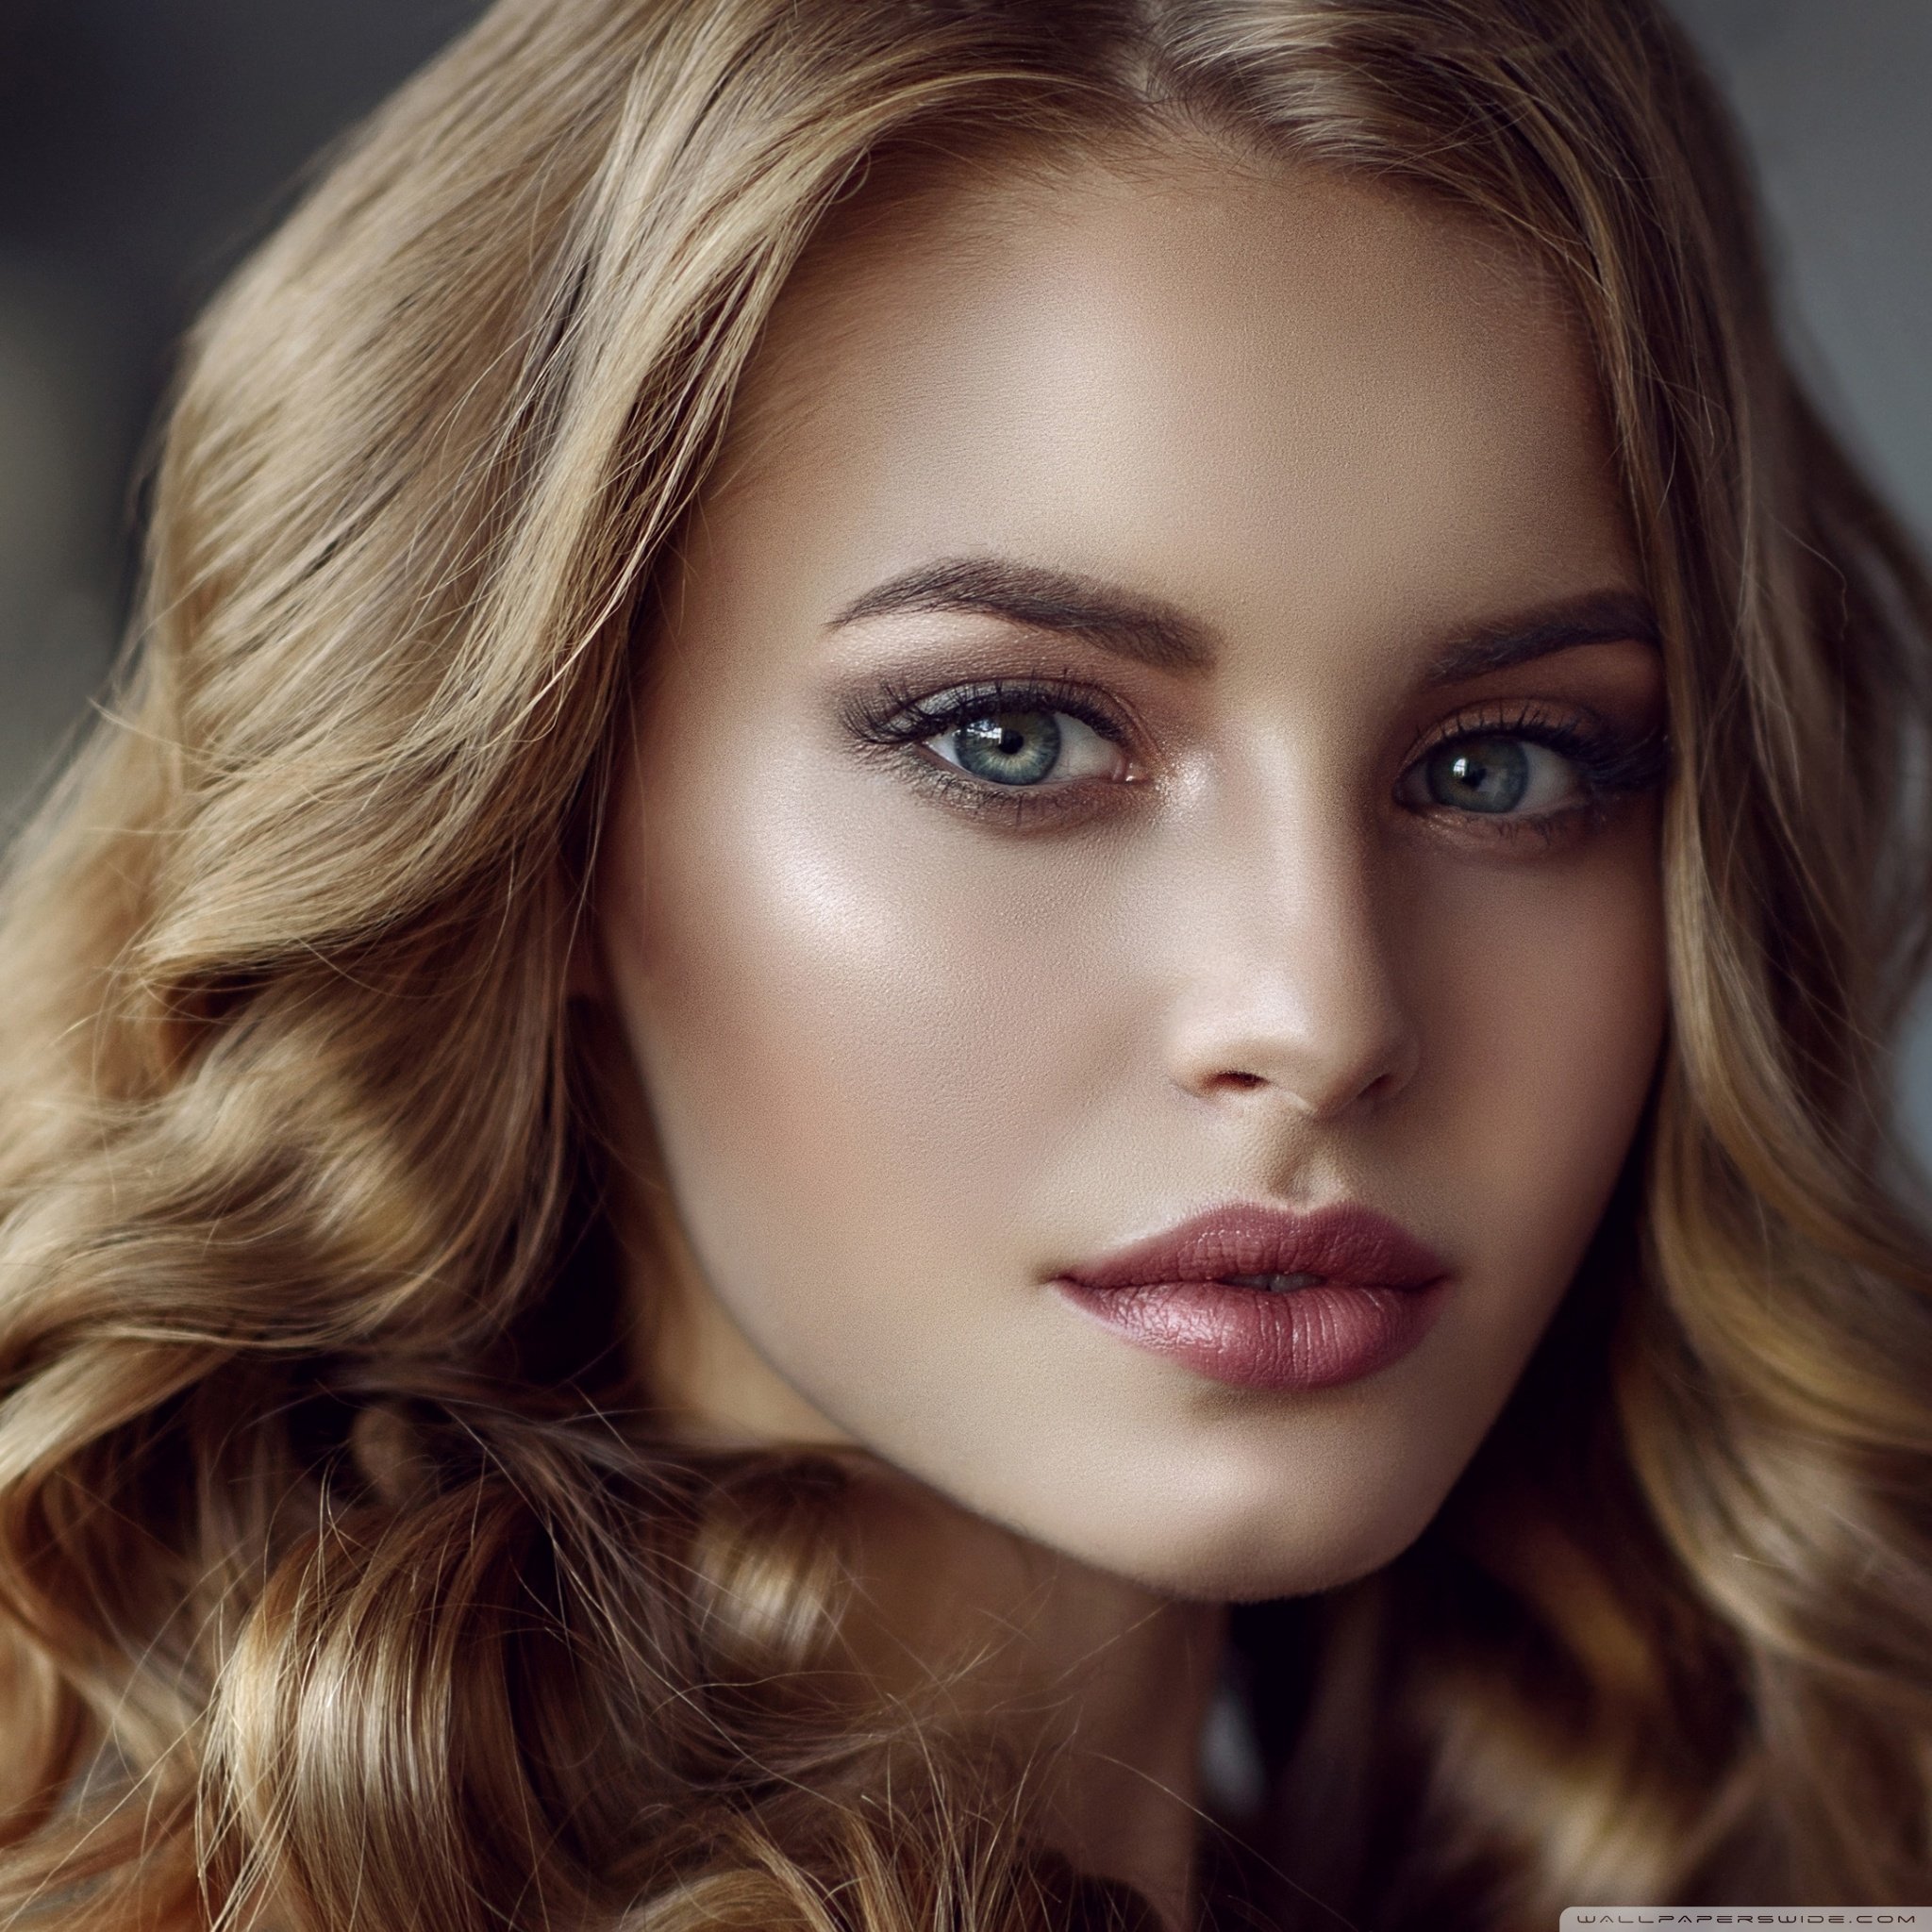 Blonde Woman With Curly Hair Ultra HD Desktop Background Wallpaper for: Widescreen & UltraWide Desktop & Laptop, Multi Display, Dual Monitor, Tablet